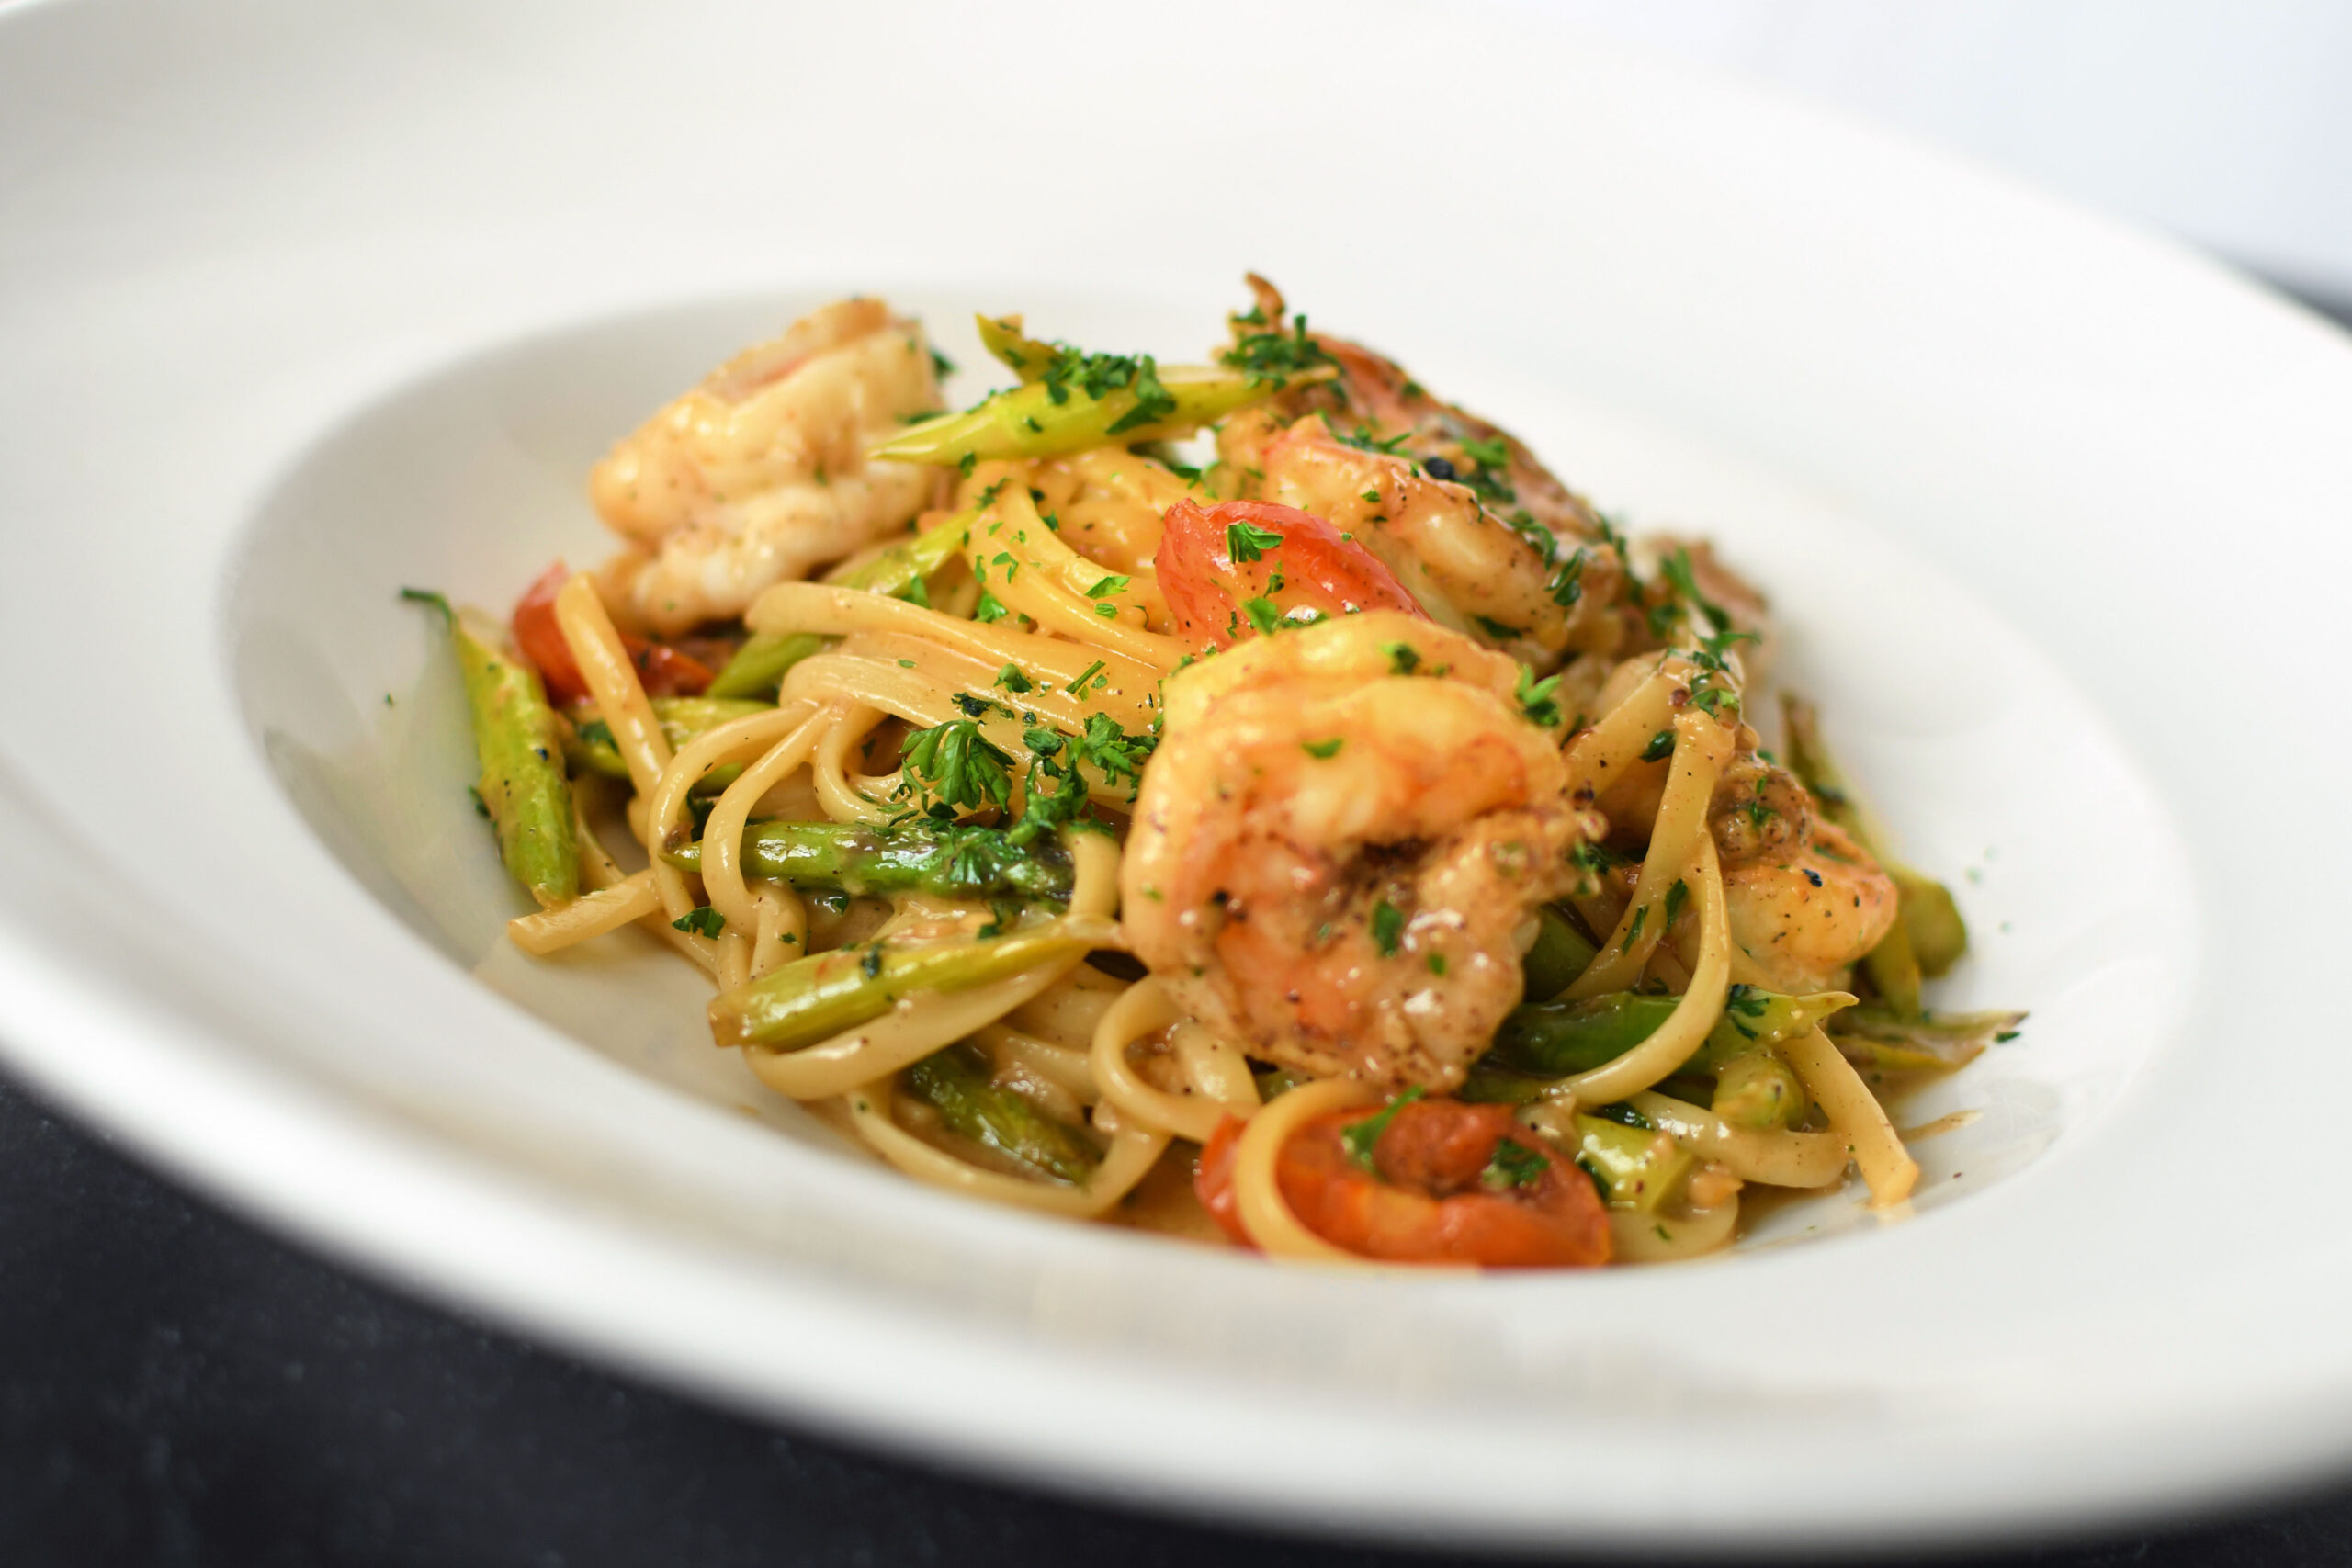 Plate of food containing pasta and shrimp